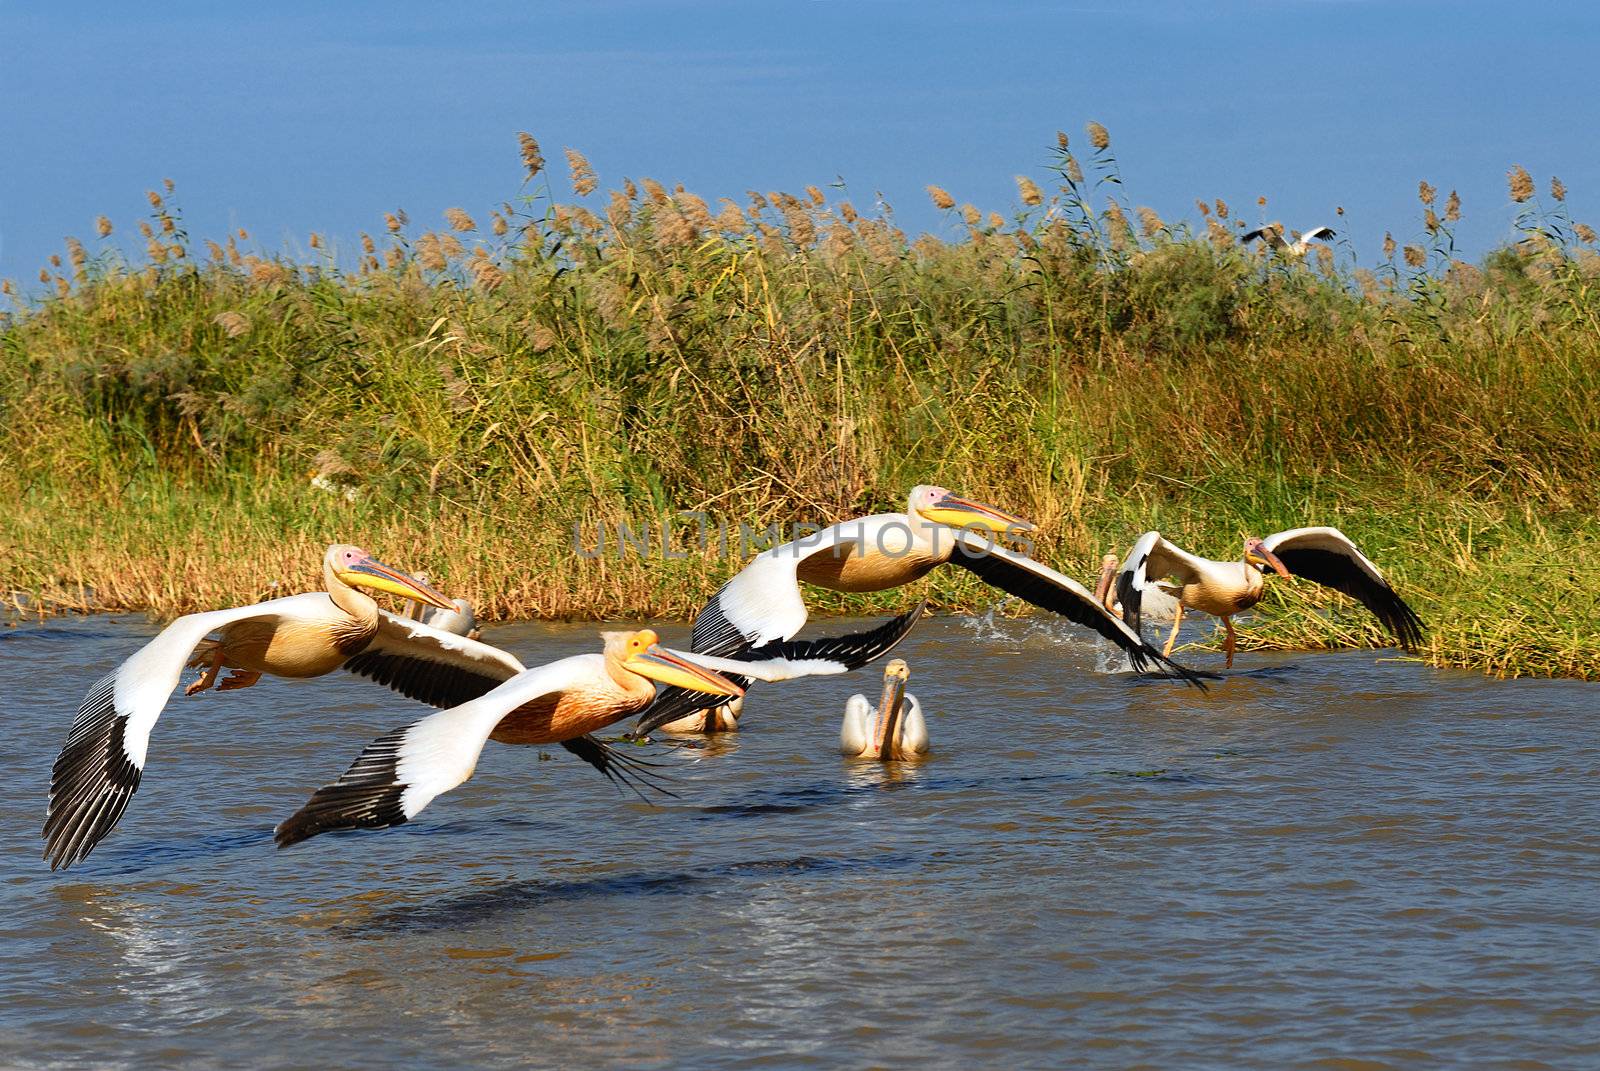 a group of pelicans in the Djoudj reserve, Senegal